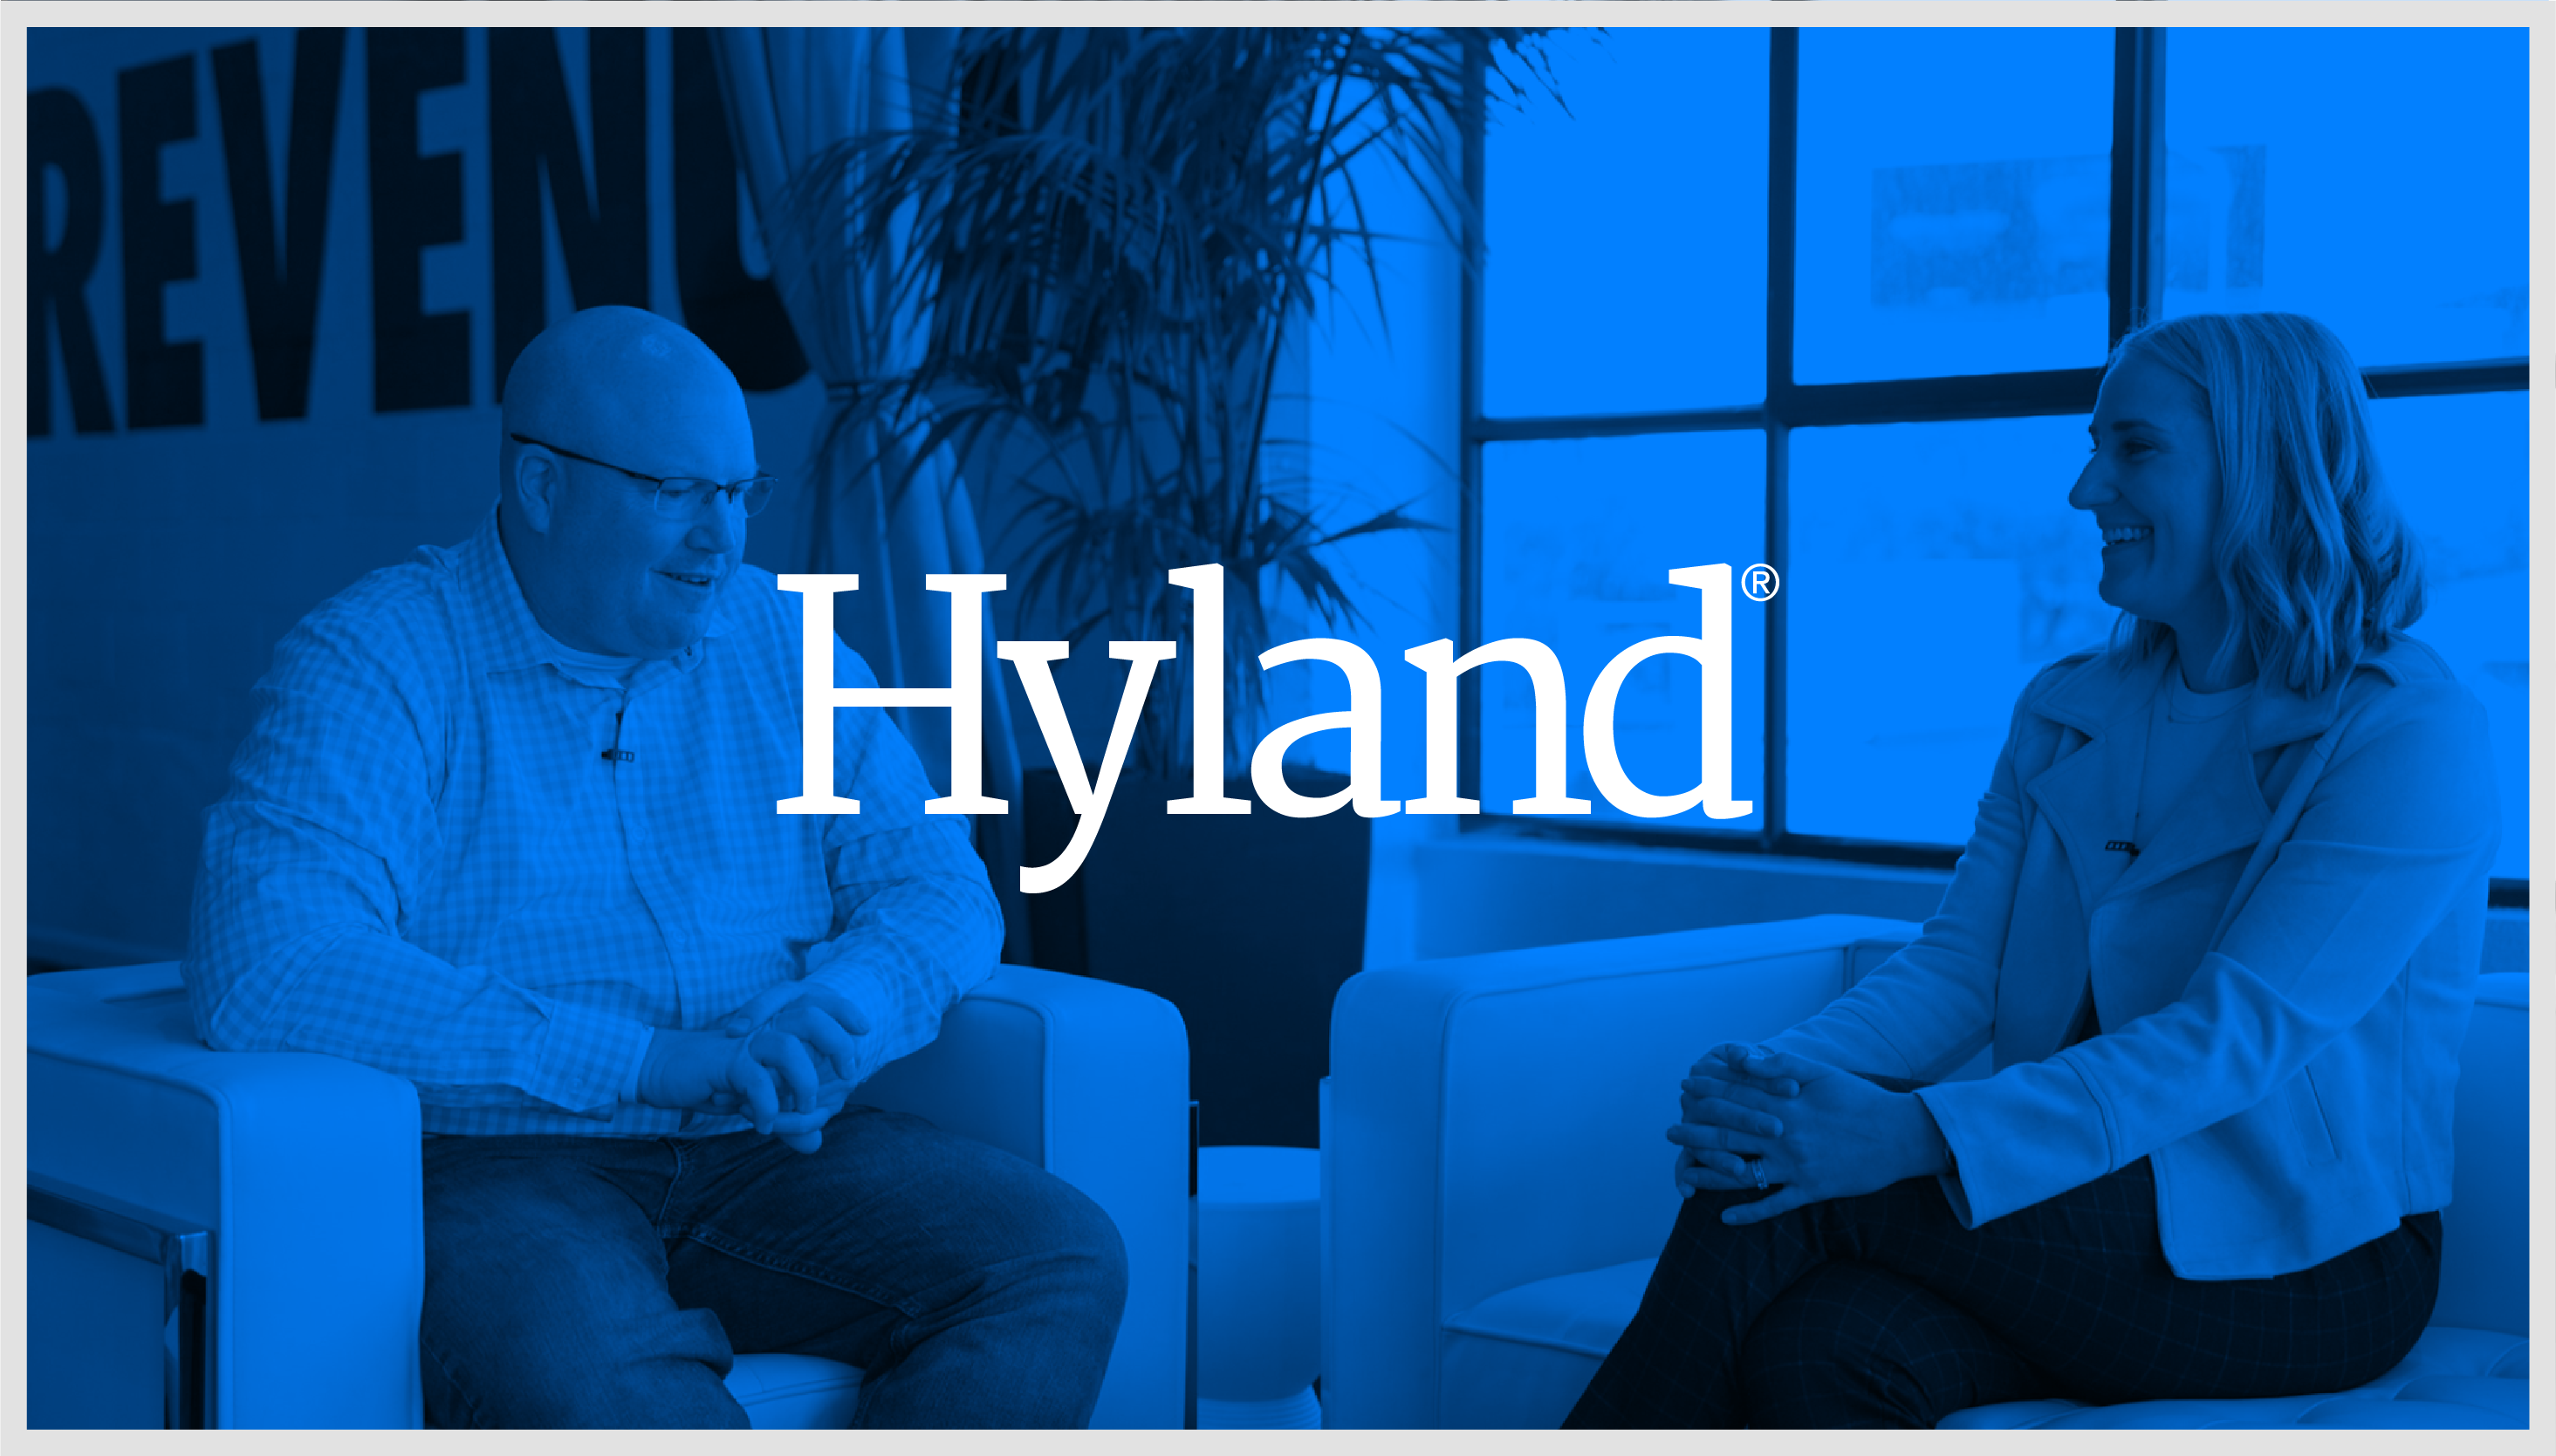 Hyland logo overlapping a photograph of Ed McQuinston, EVP, Chief Commercial Officer at Hyland, and Laura Wille, Director of Customer Marketing at Clari